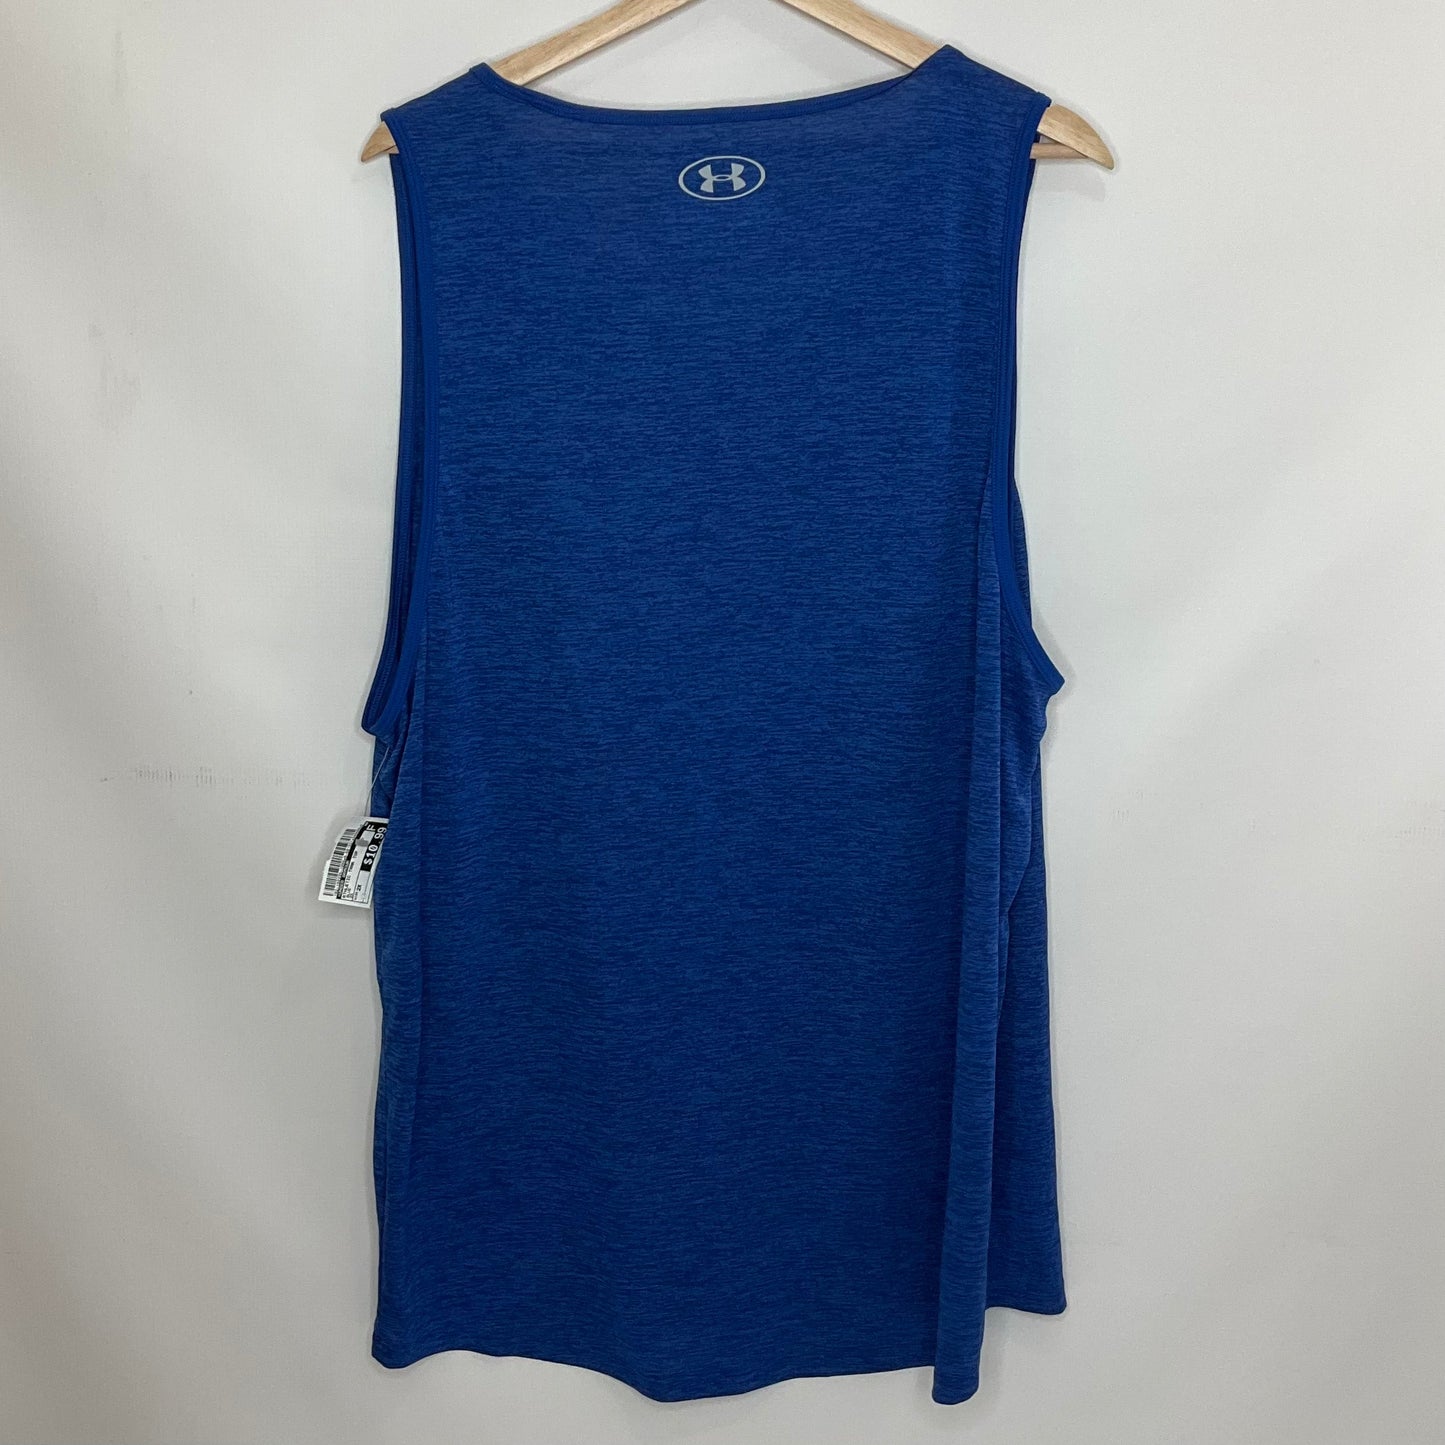 Blue Athletic Tank Top Under Armour, Size 2x